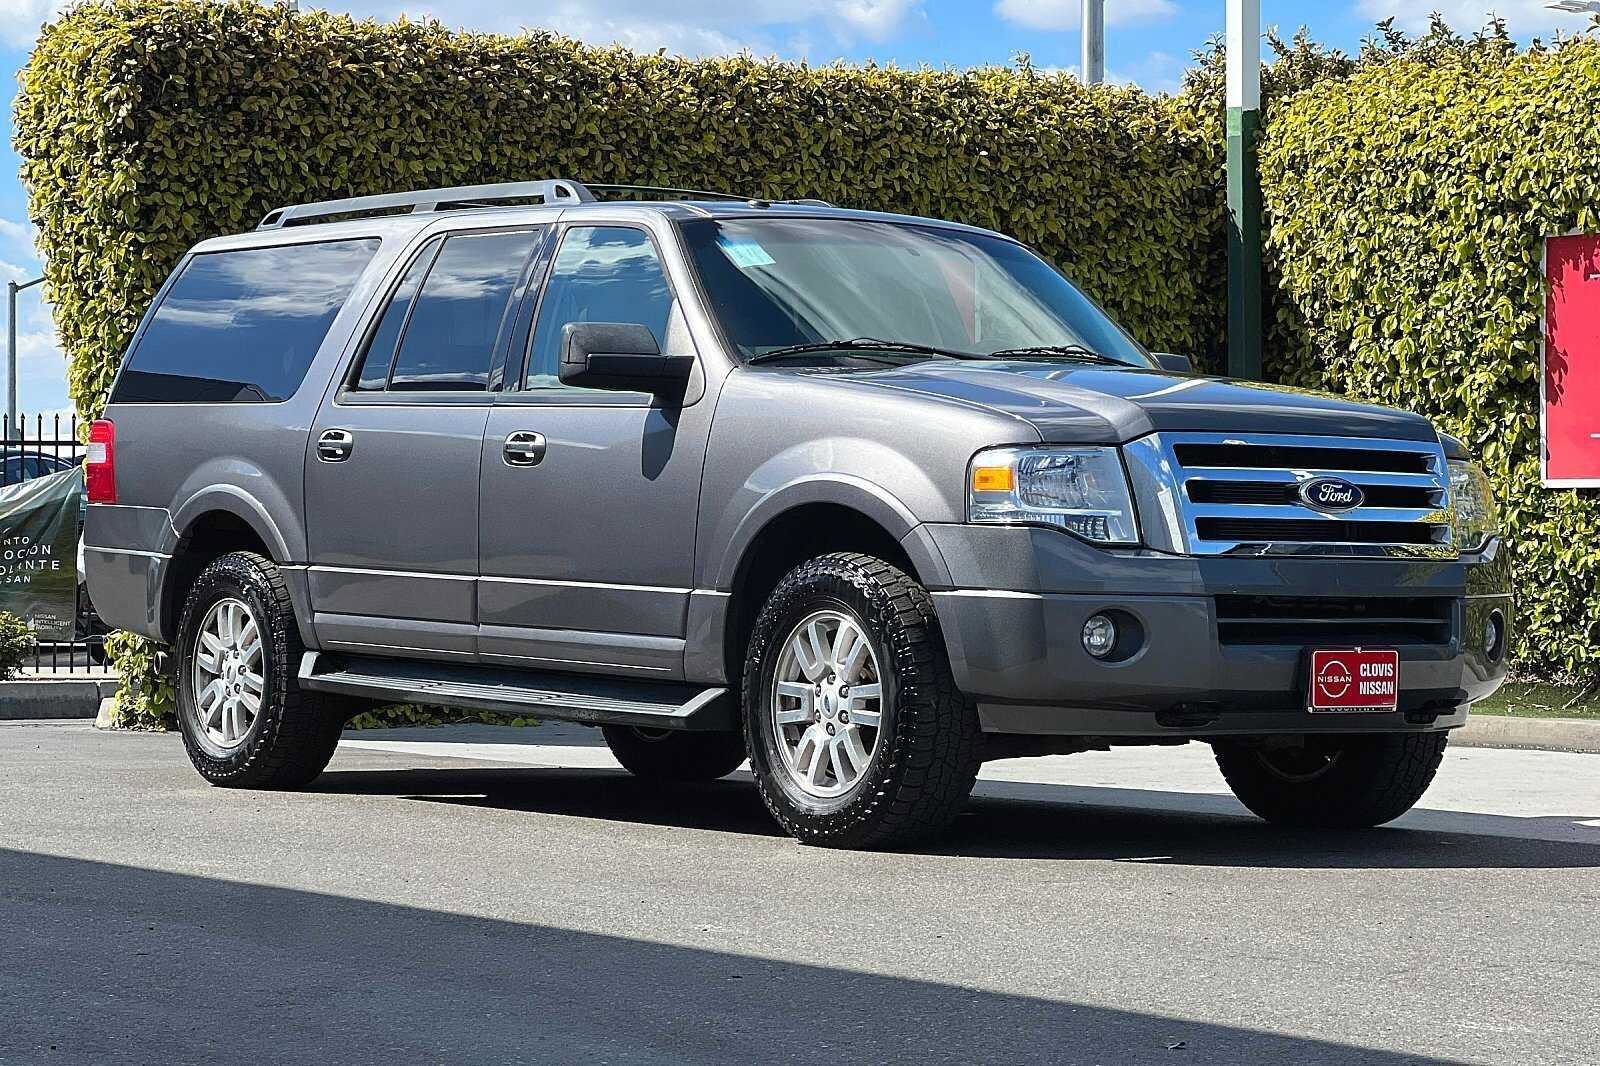 CarSaver | 2012 Ford Expedition EL Prices in Clovis, CA